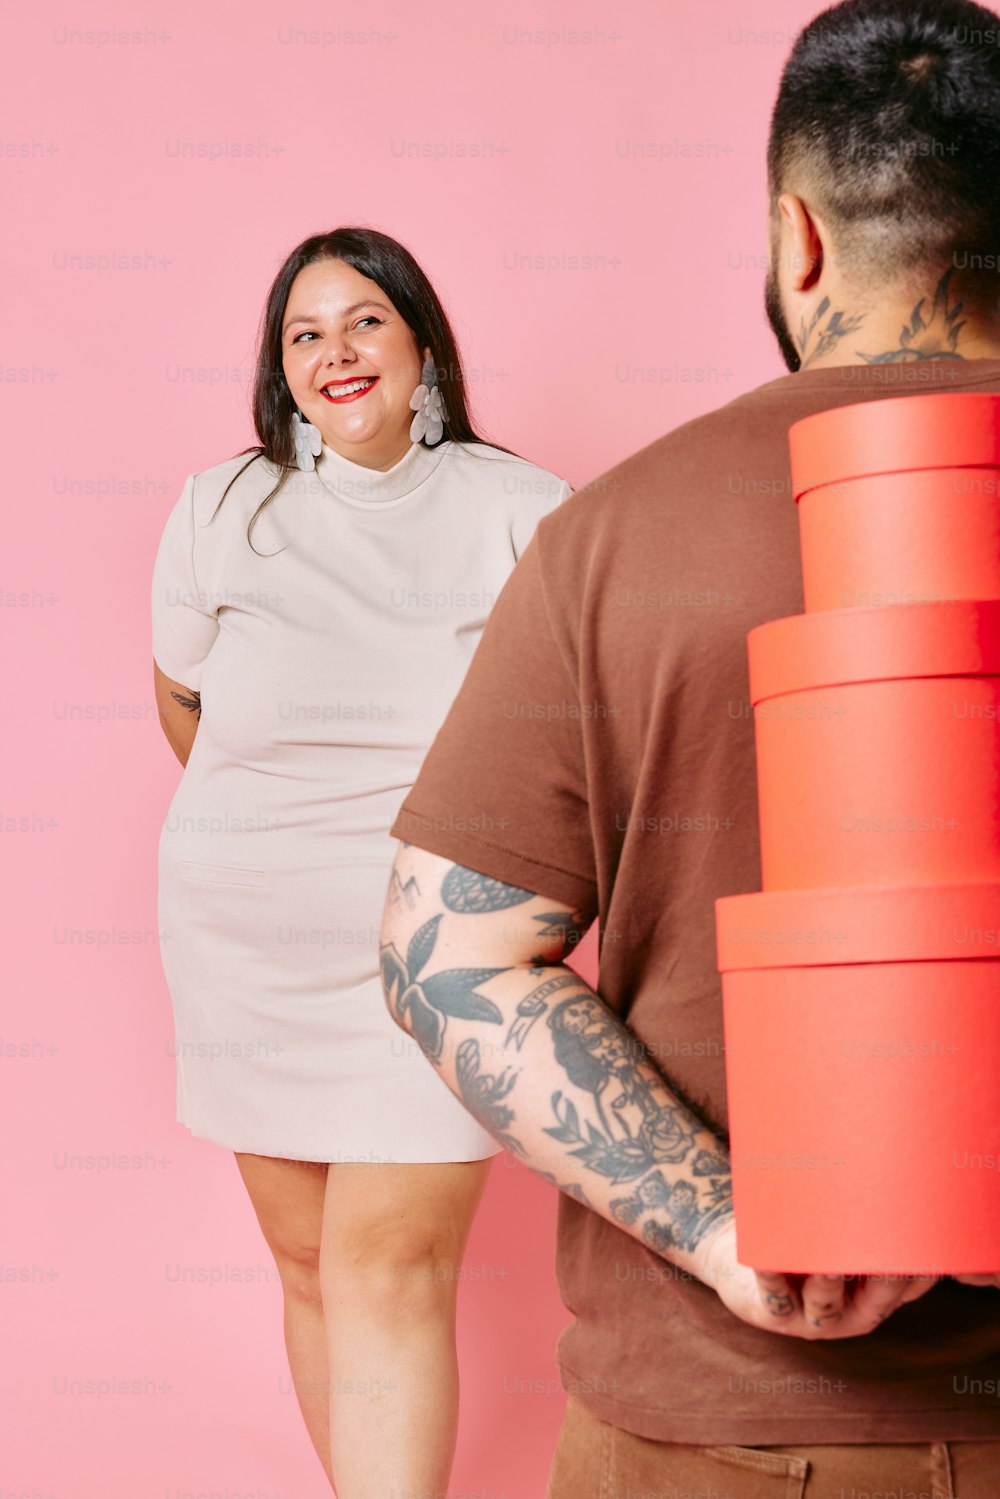 a man holding a giant stack of red cups next to a woman